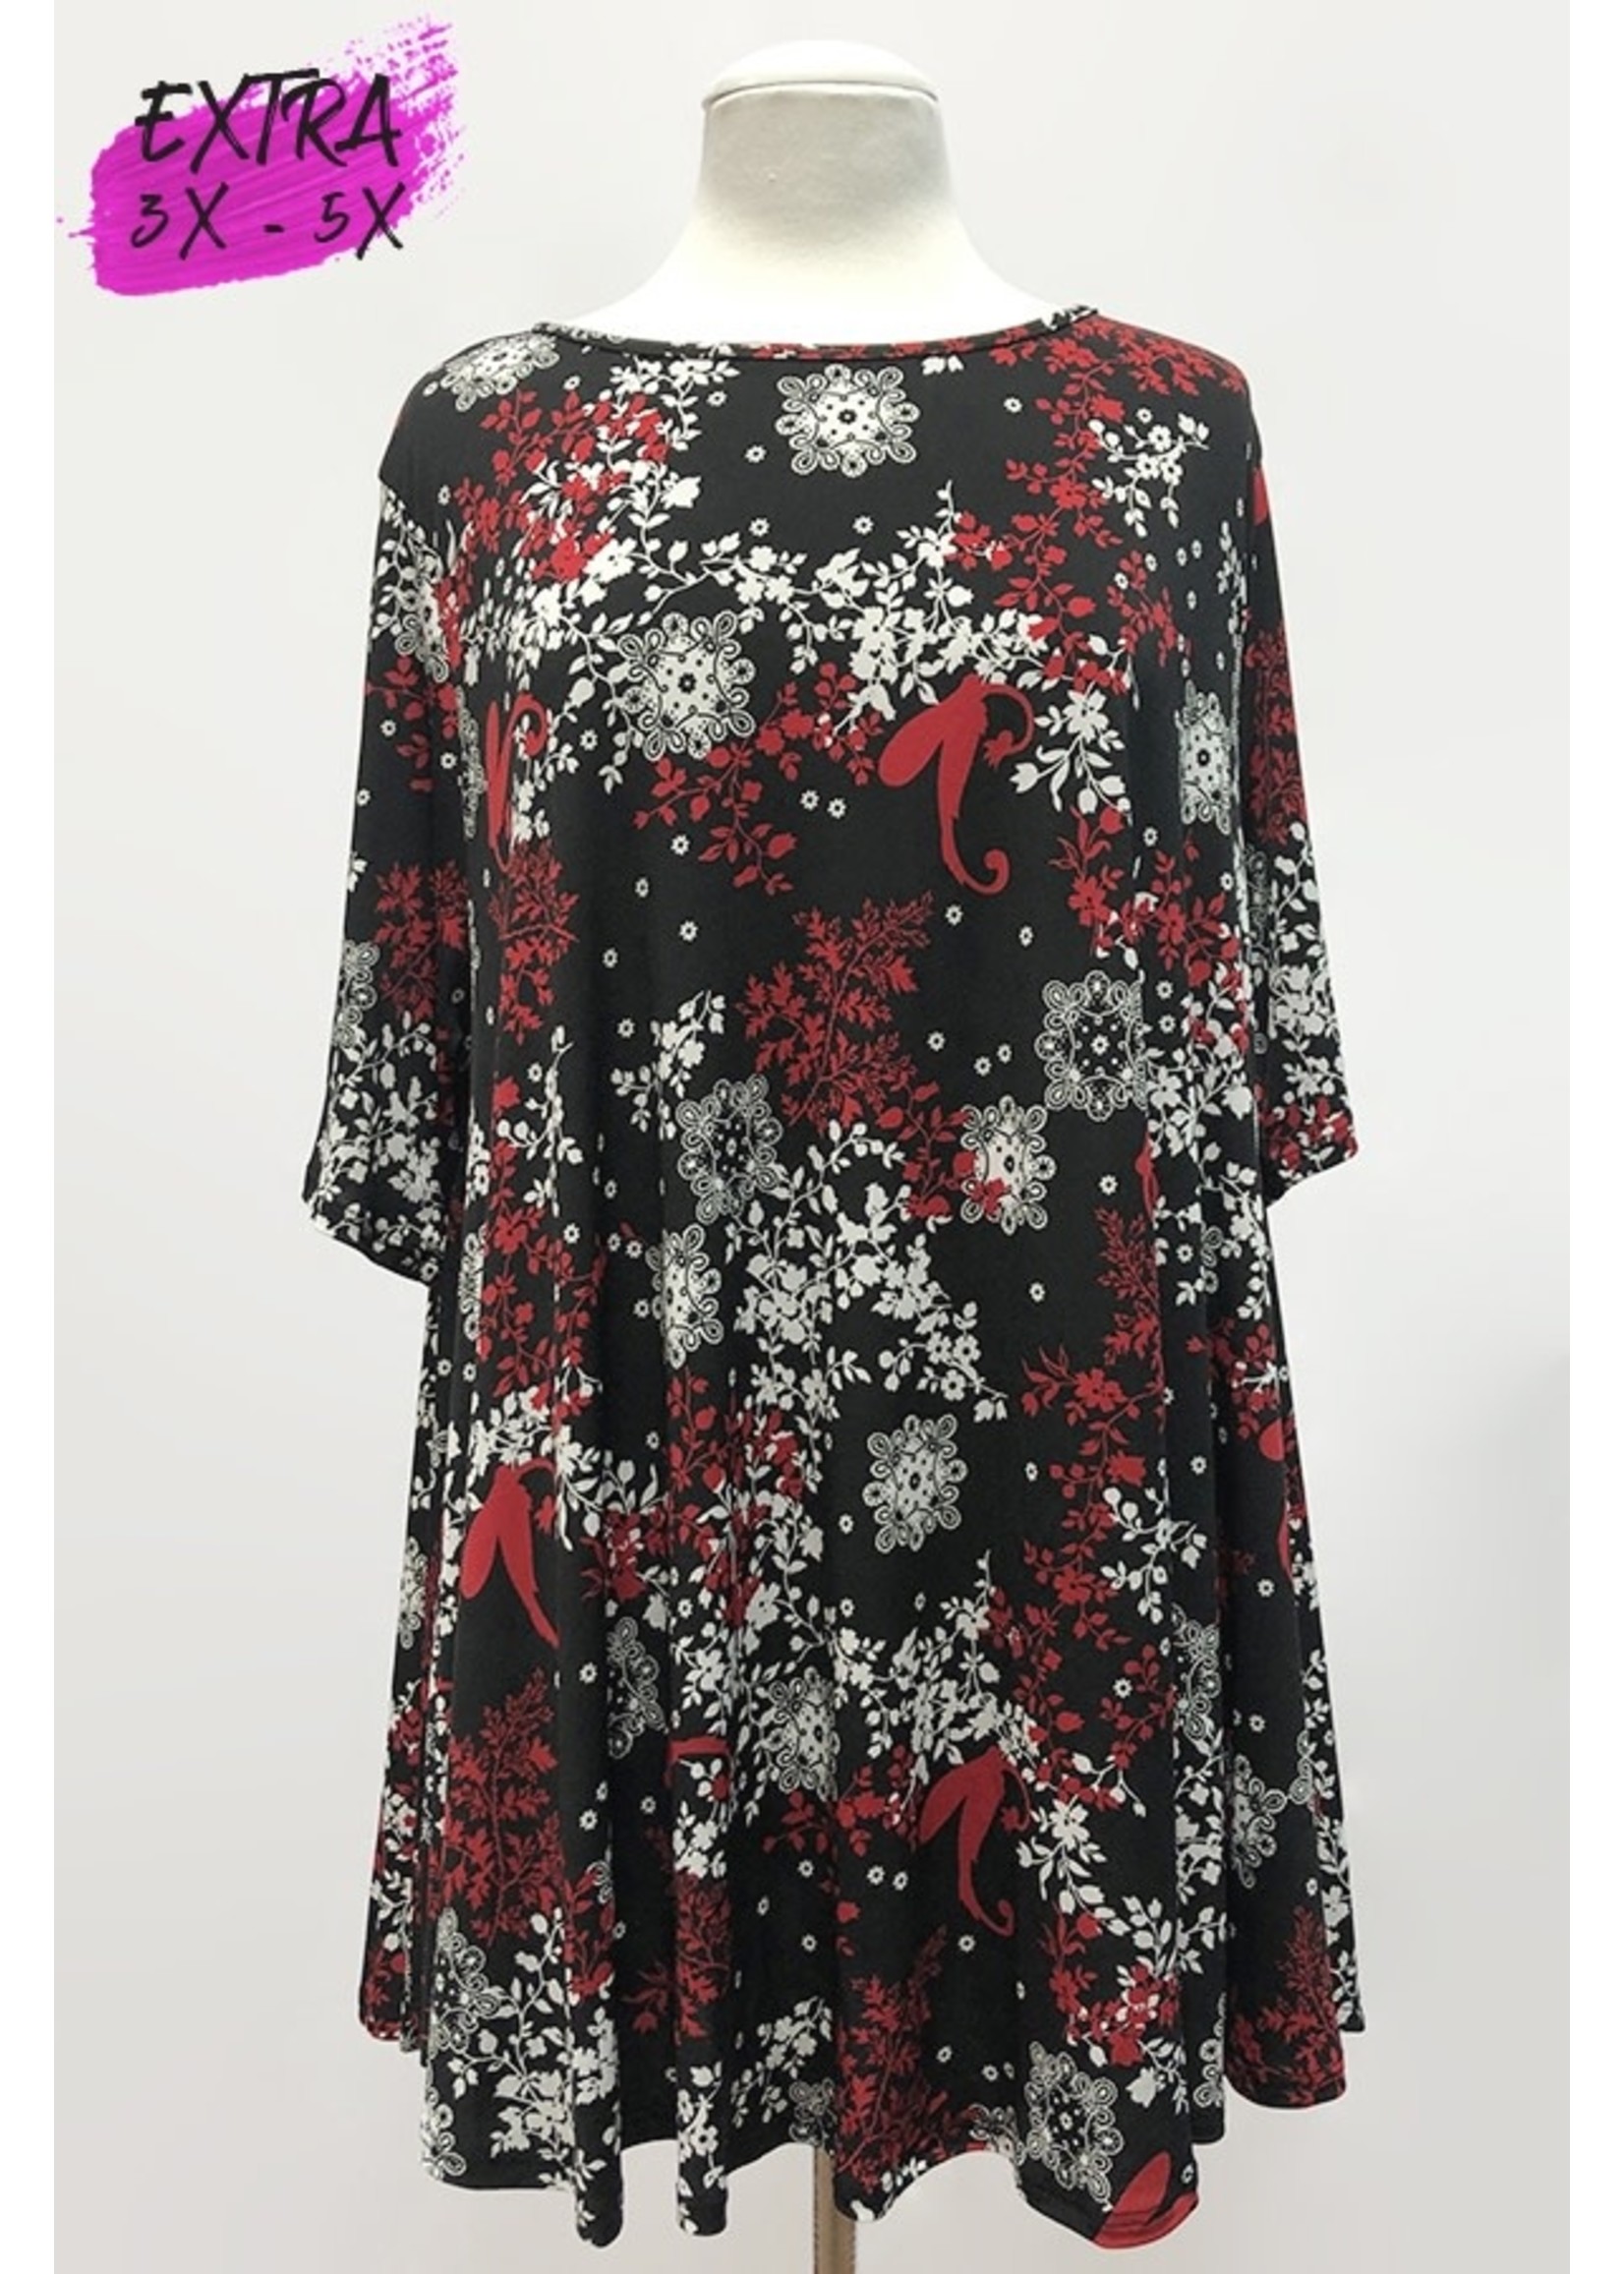 Short Sleeve Red/Black Floral Tunic Top